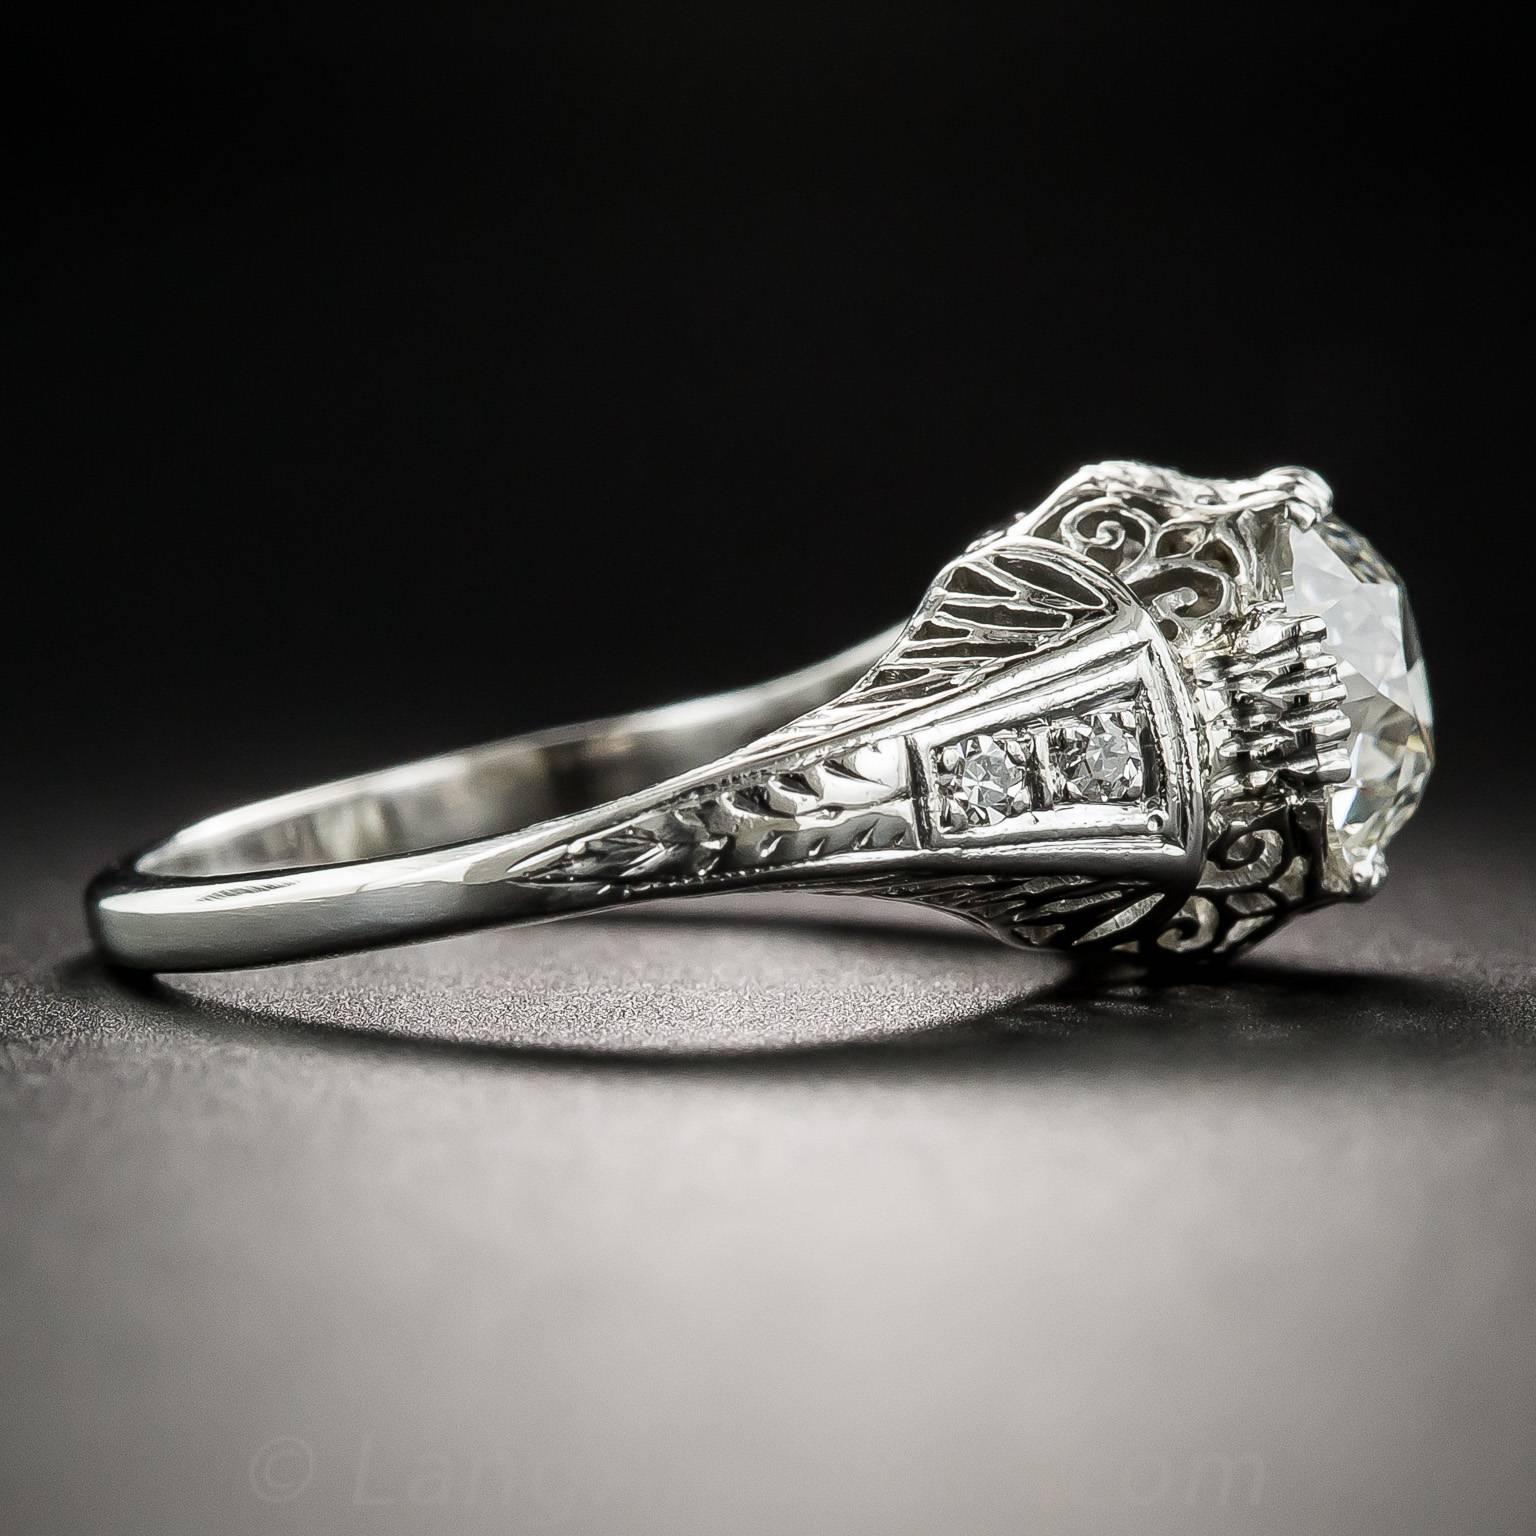 Art Deco 1.69 Carat GIA J VVS2 Diamond Ring  In Excellent Condition For Sale In San Francisco, CA